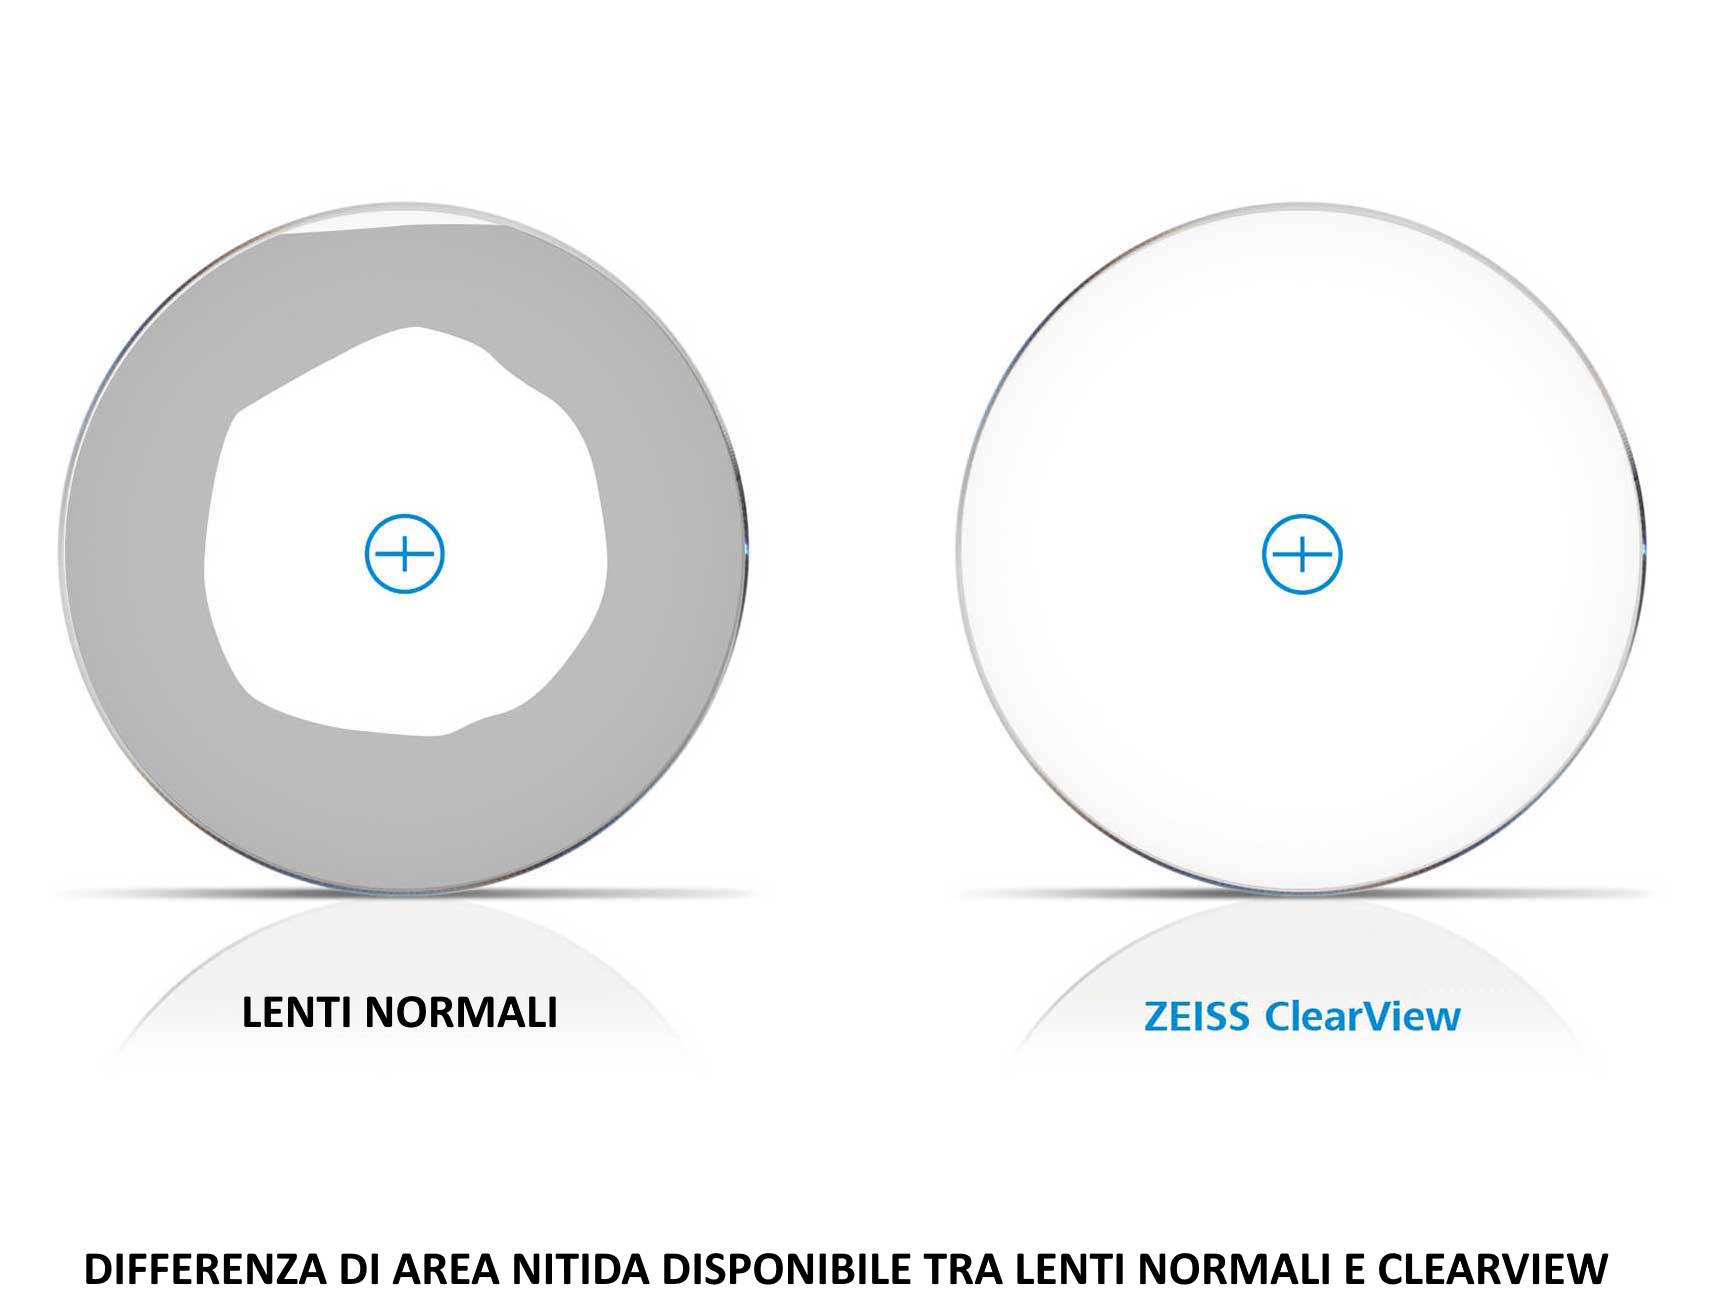 Benefici delle Clearview Zeiss